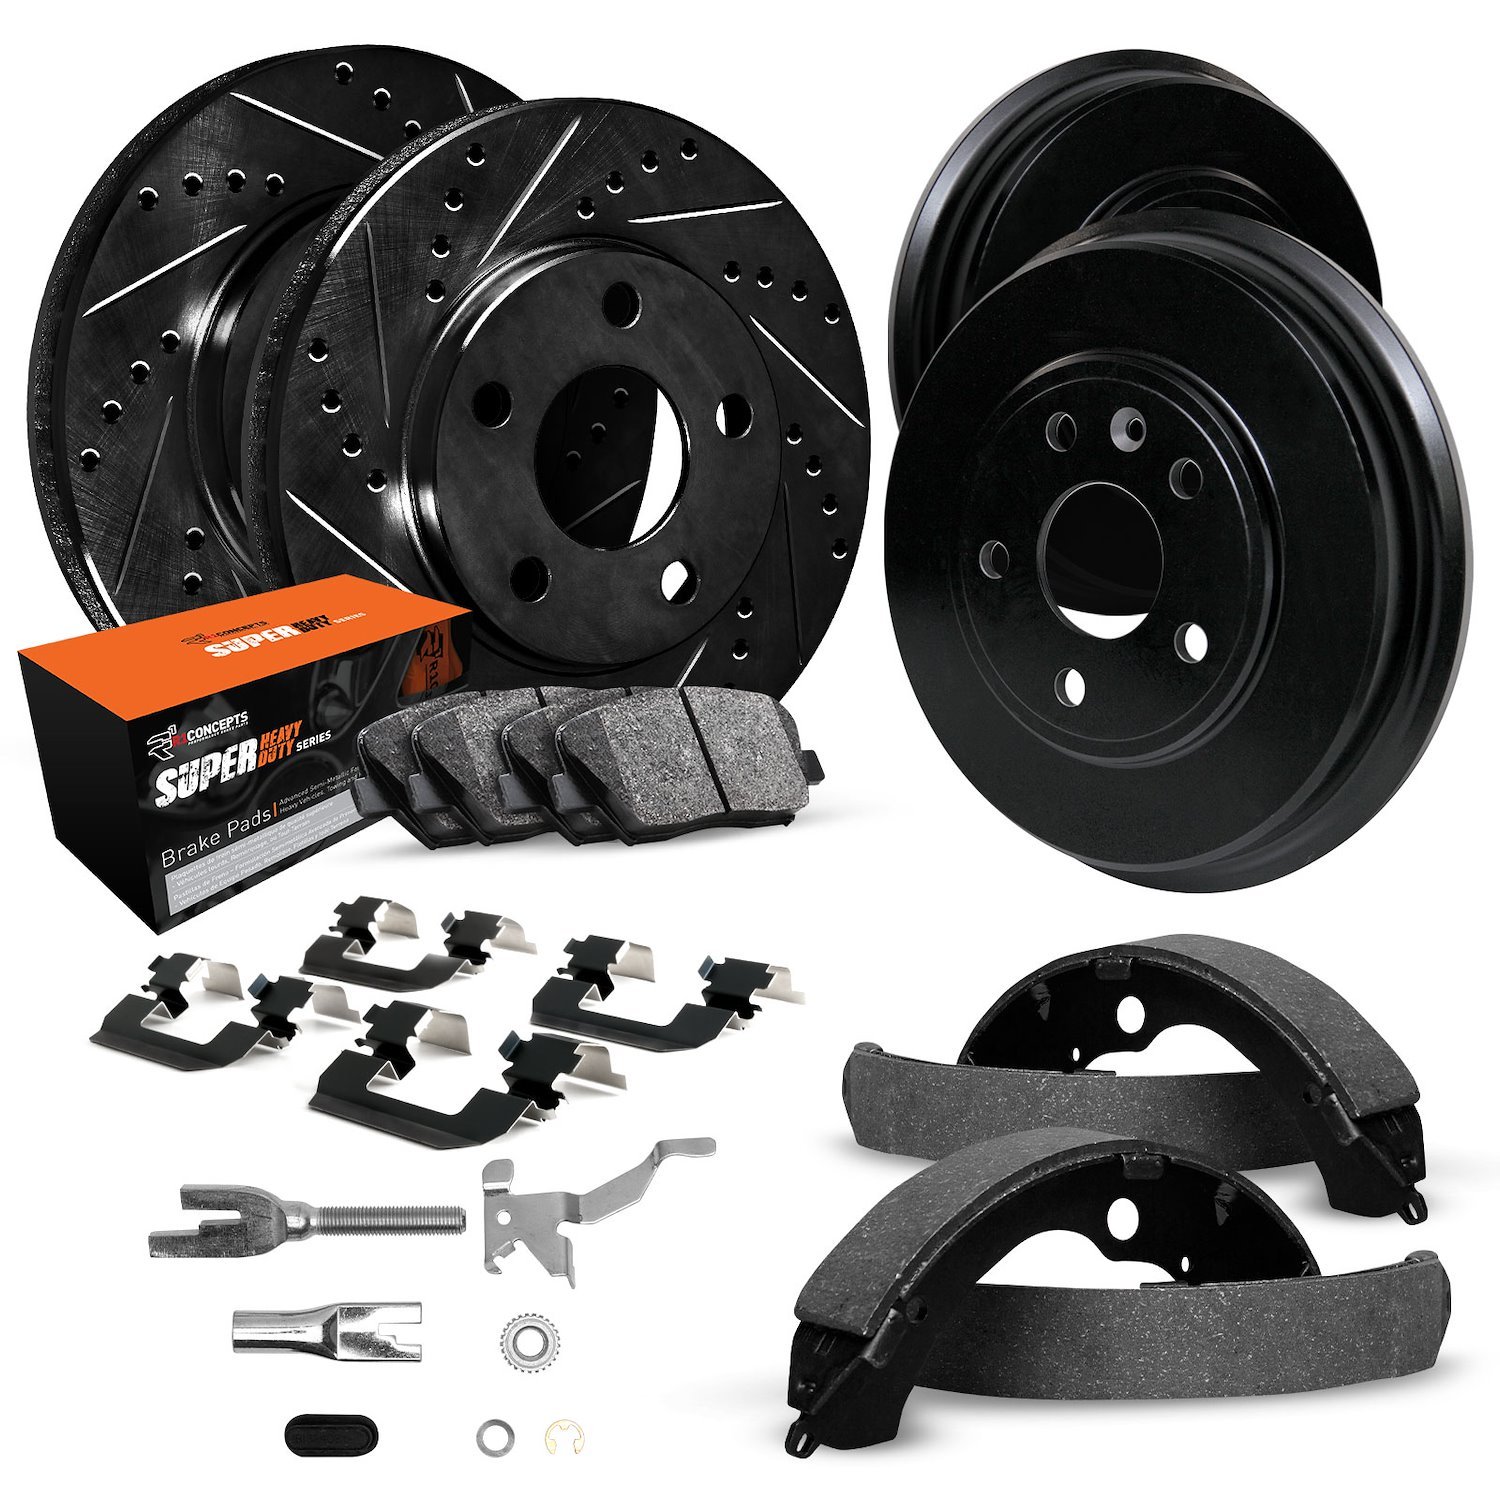 E-Line Drilled/Slotted Black Rotor & Drum Set w/Super-Duty Pads, Shoes, Hardware/Adjusters, 1990-1991 GM